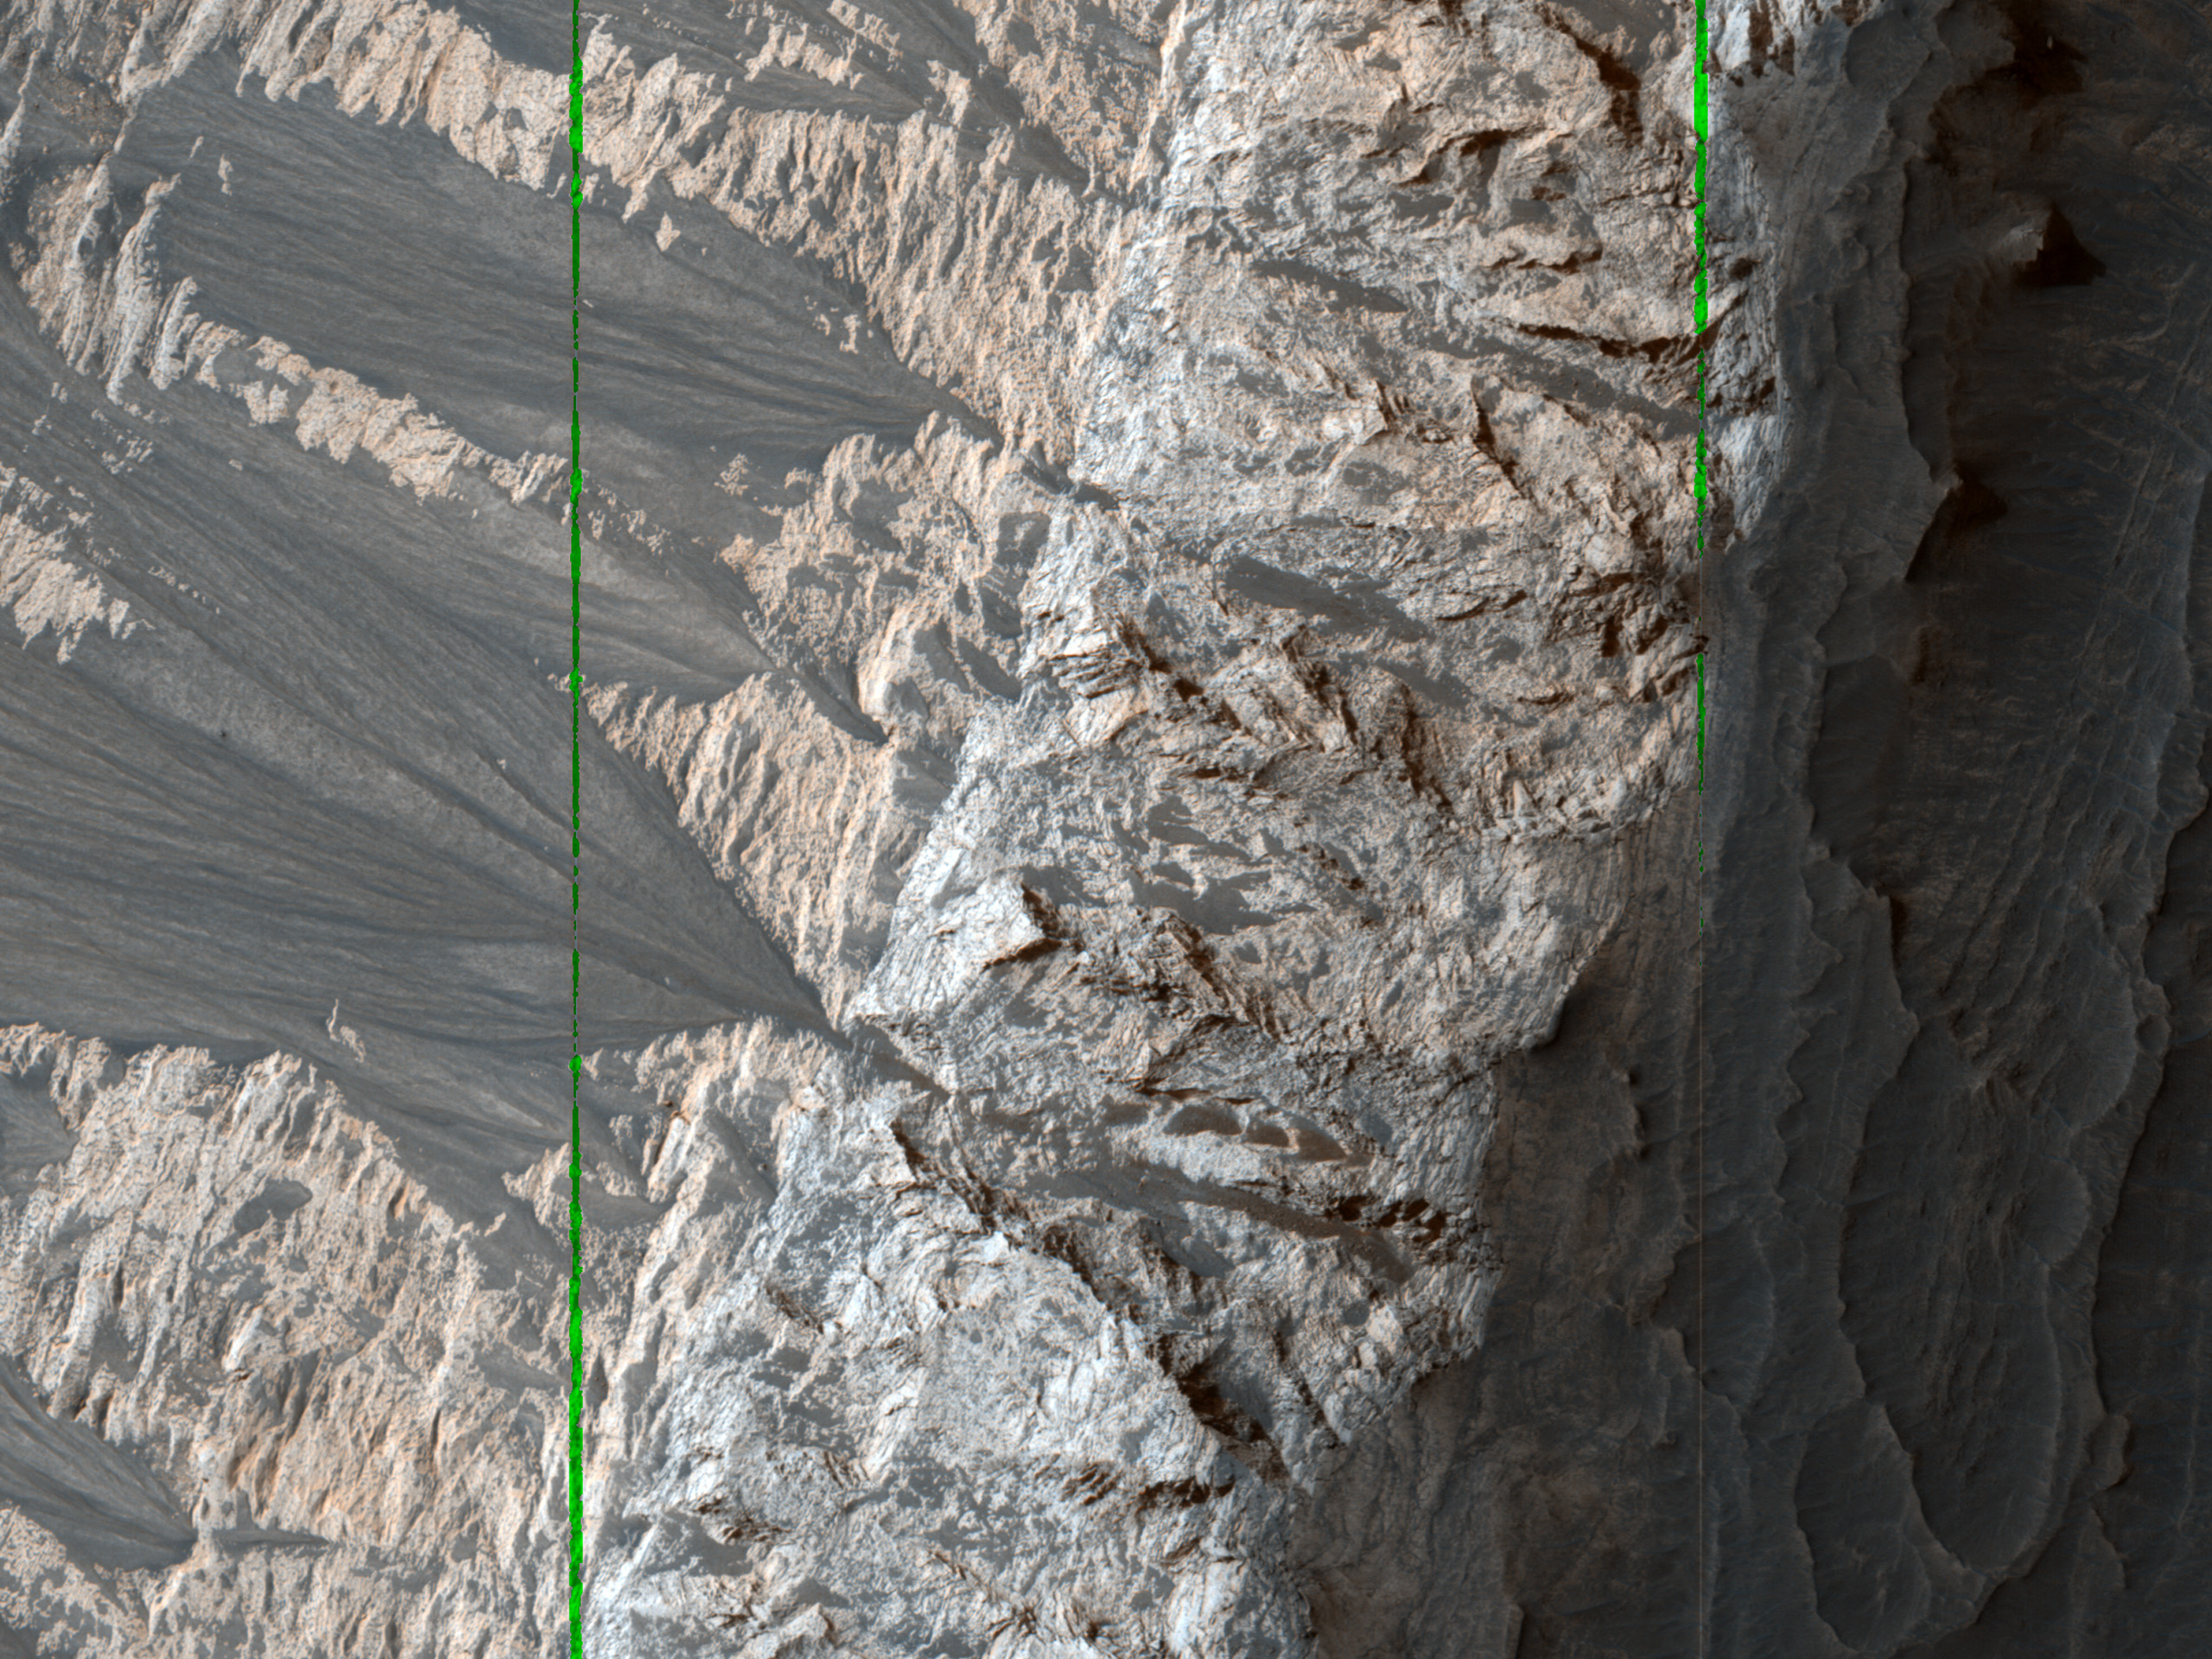 Cliffs of Crumbling, Layered Sediments